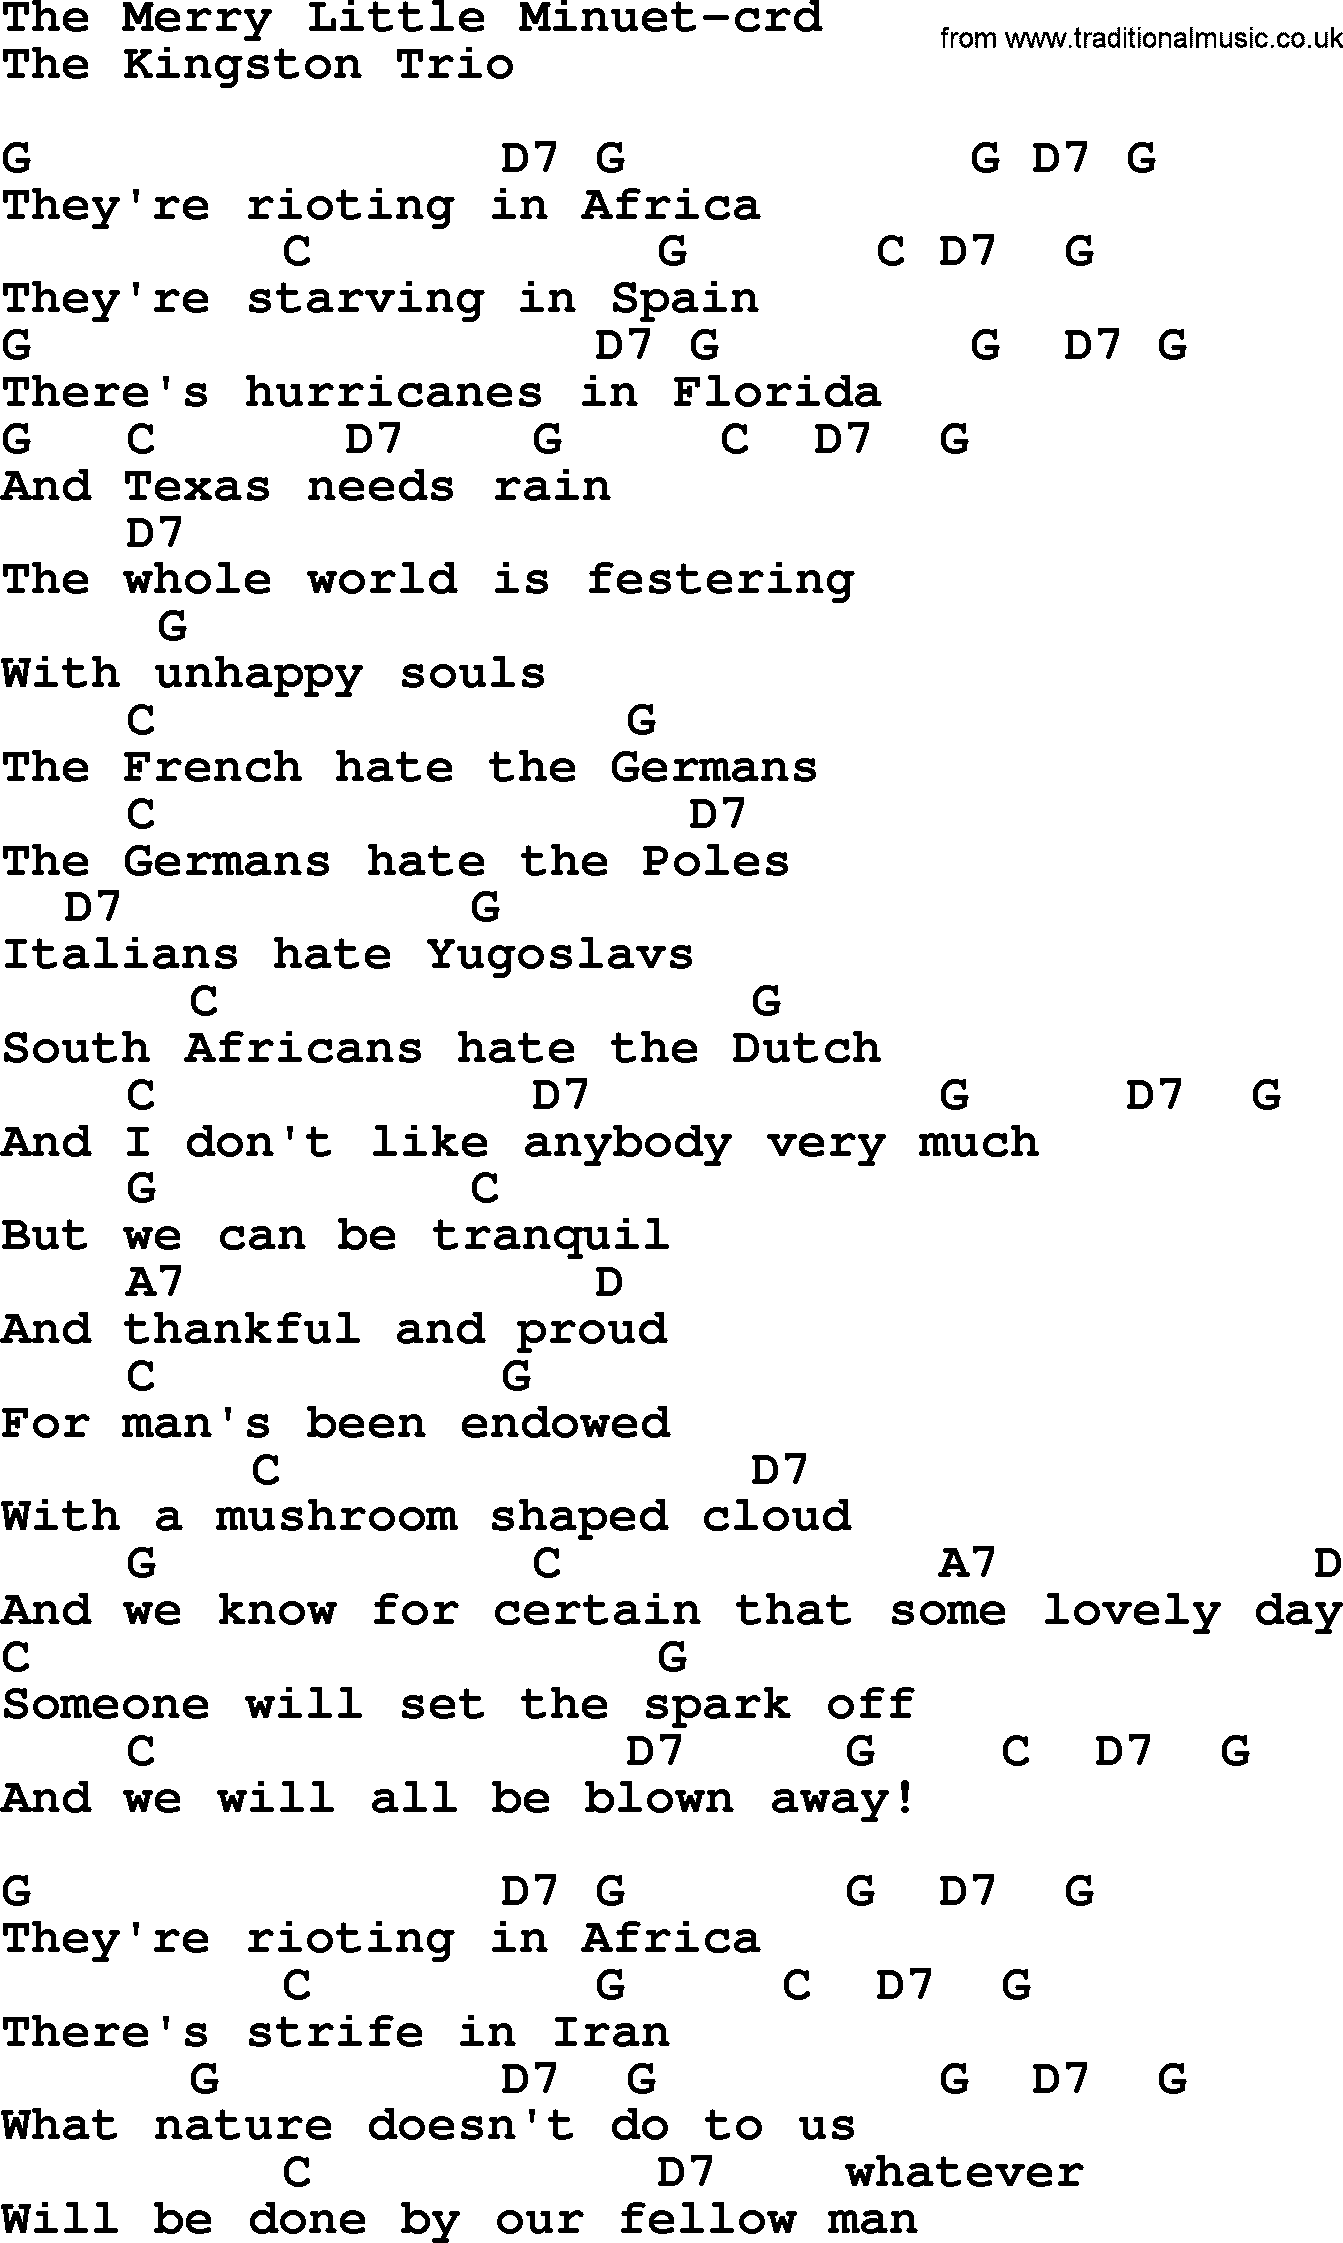 Kingston Trio song The Merry Little Minuet, lyrics and chords